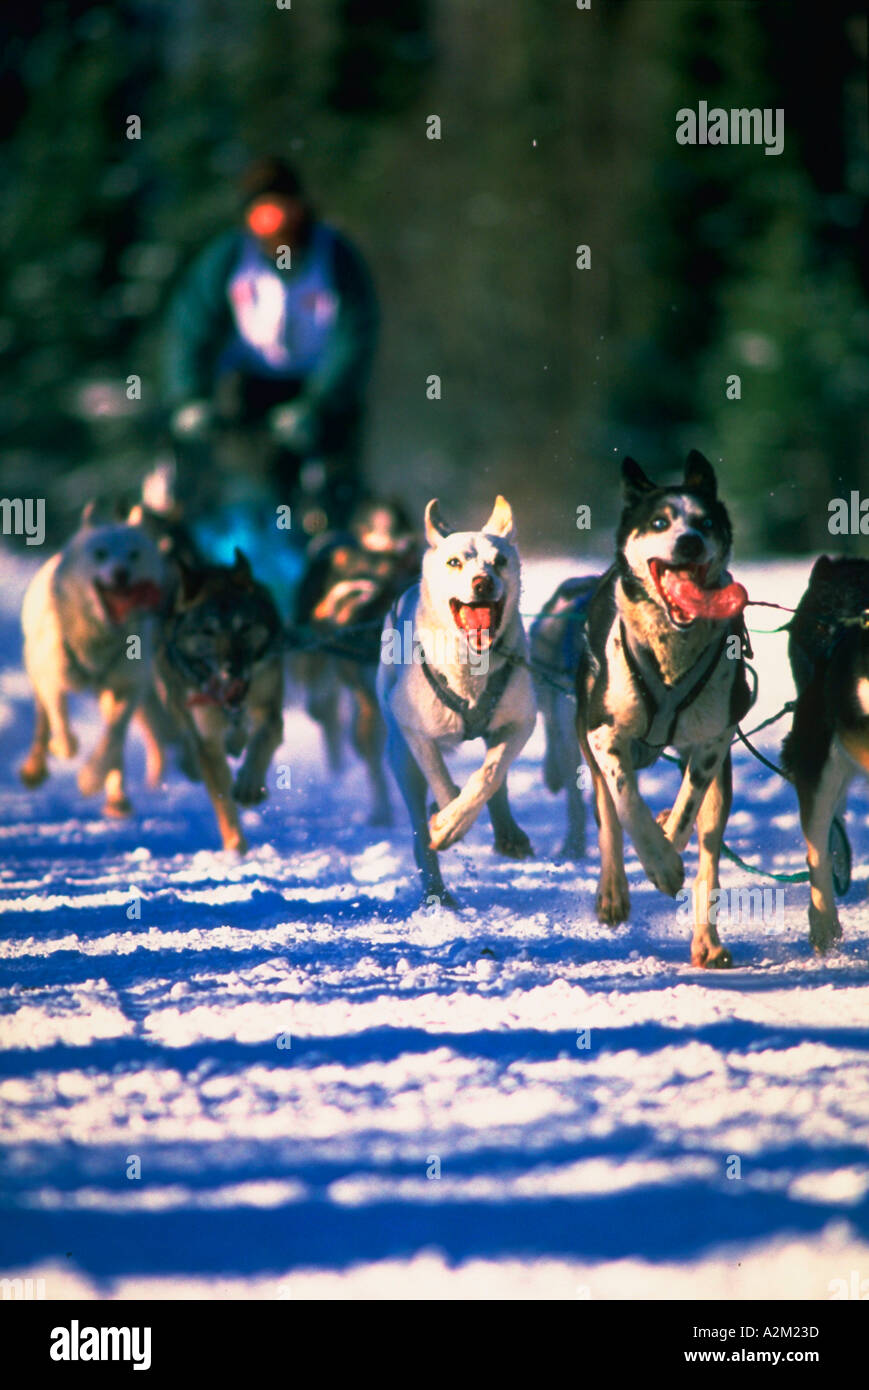 Team of sled dogs pulling rider during a sled dog race Anchorage Alaska Stock Photo